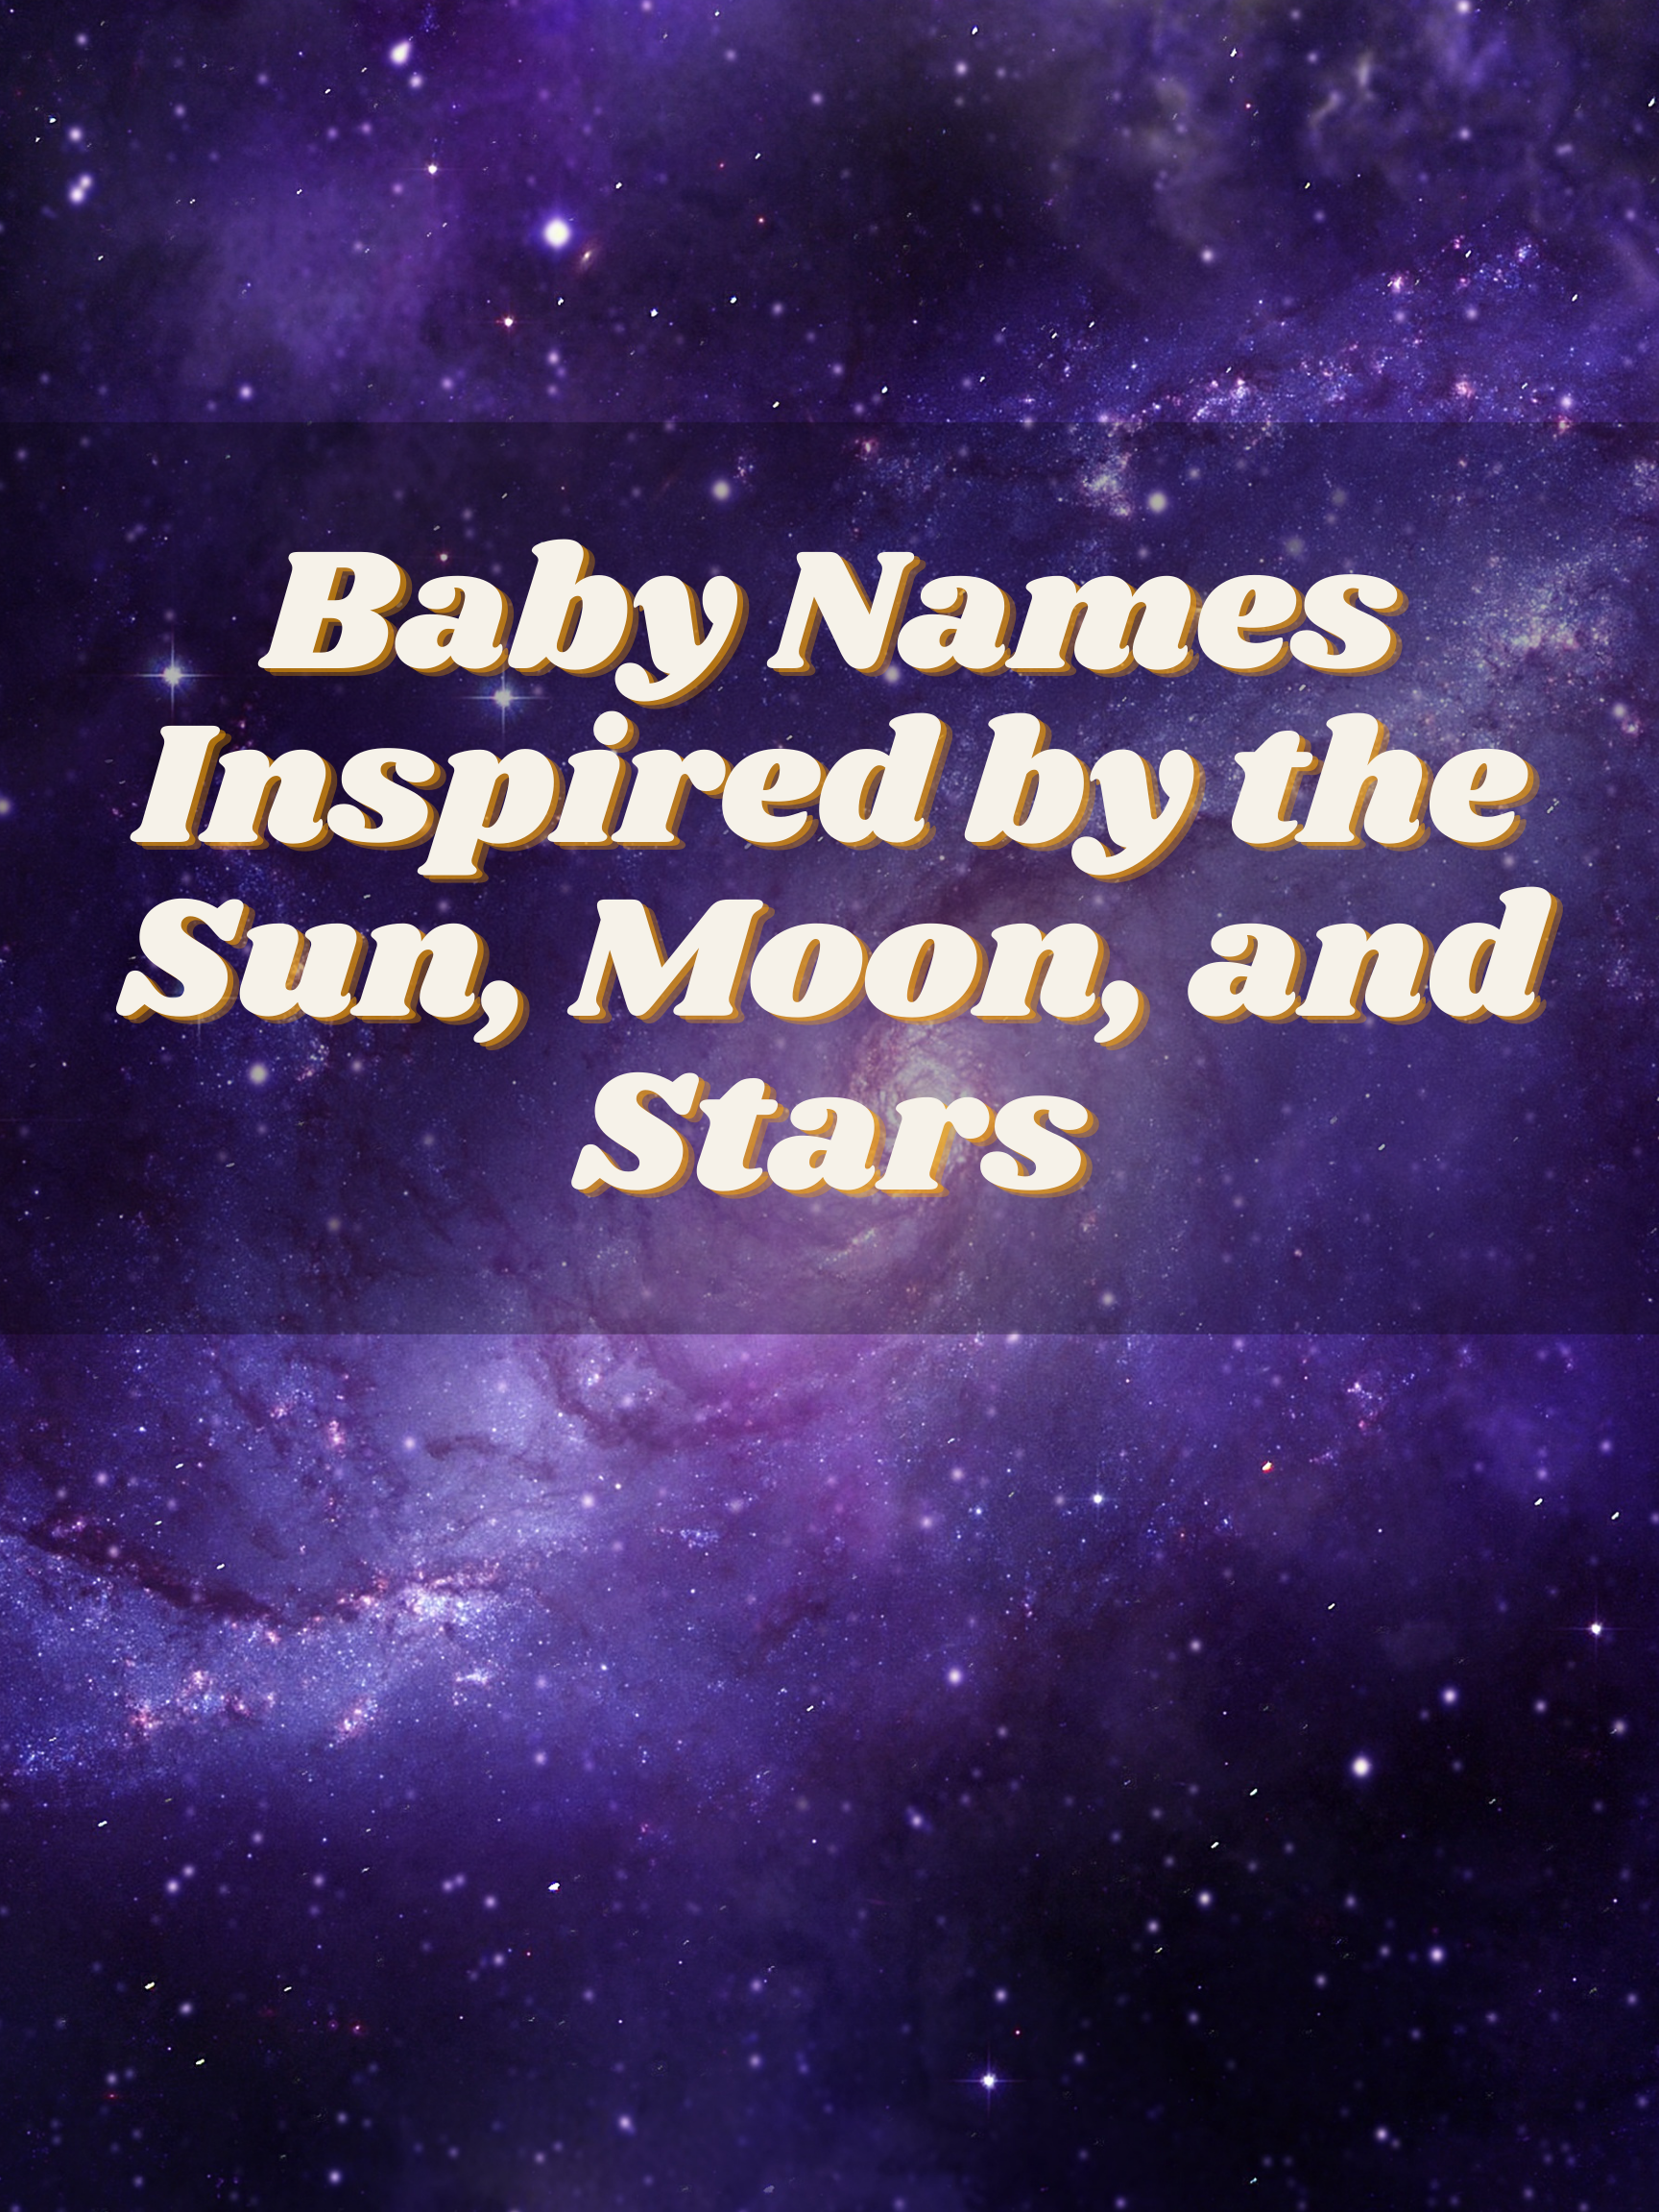 Baby Names Inspired by: the Sun, Moon, and Stars